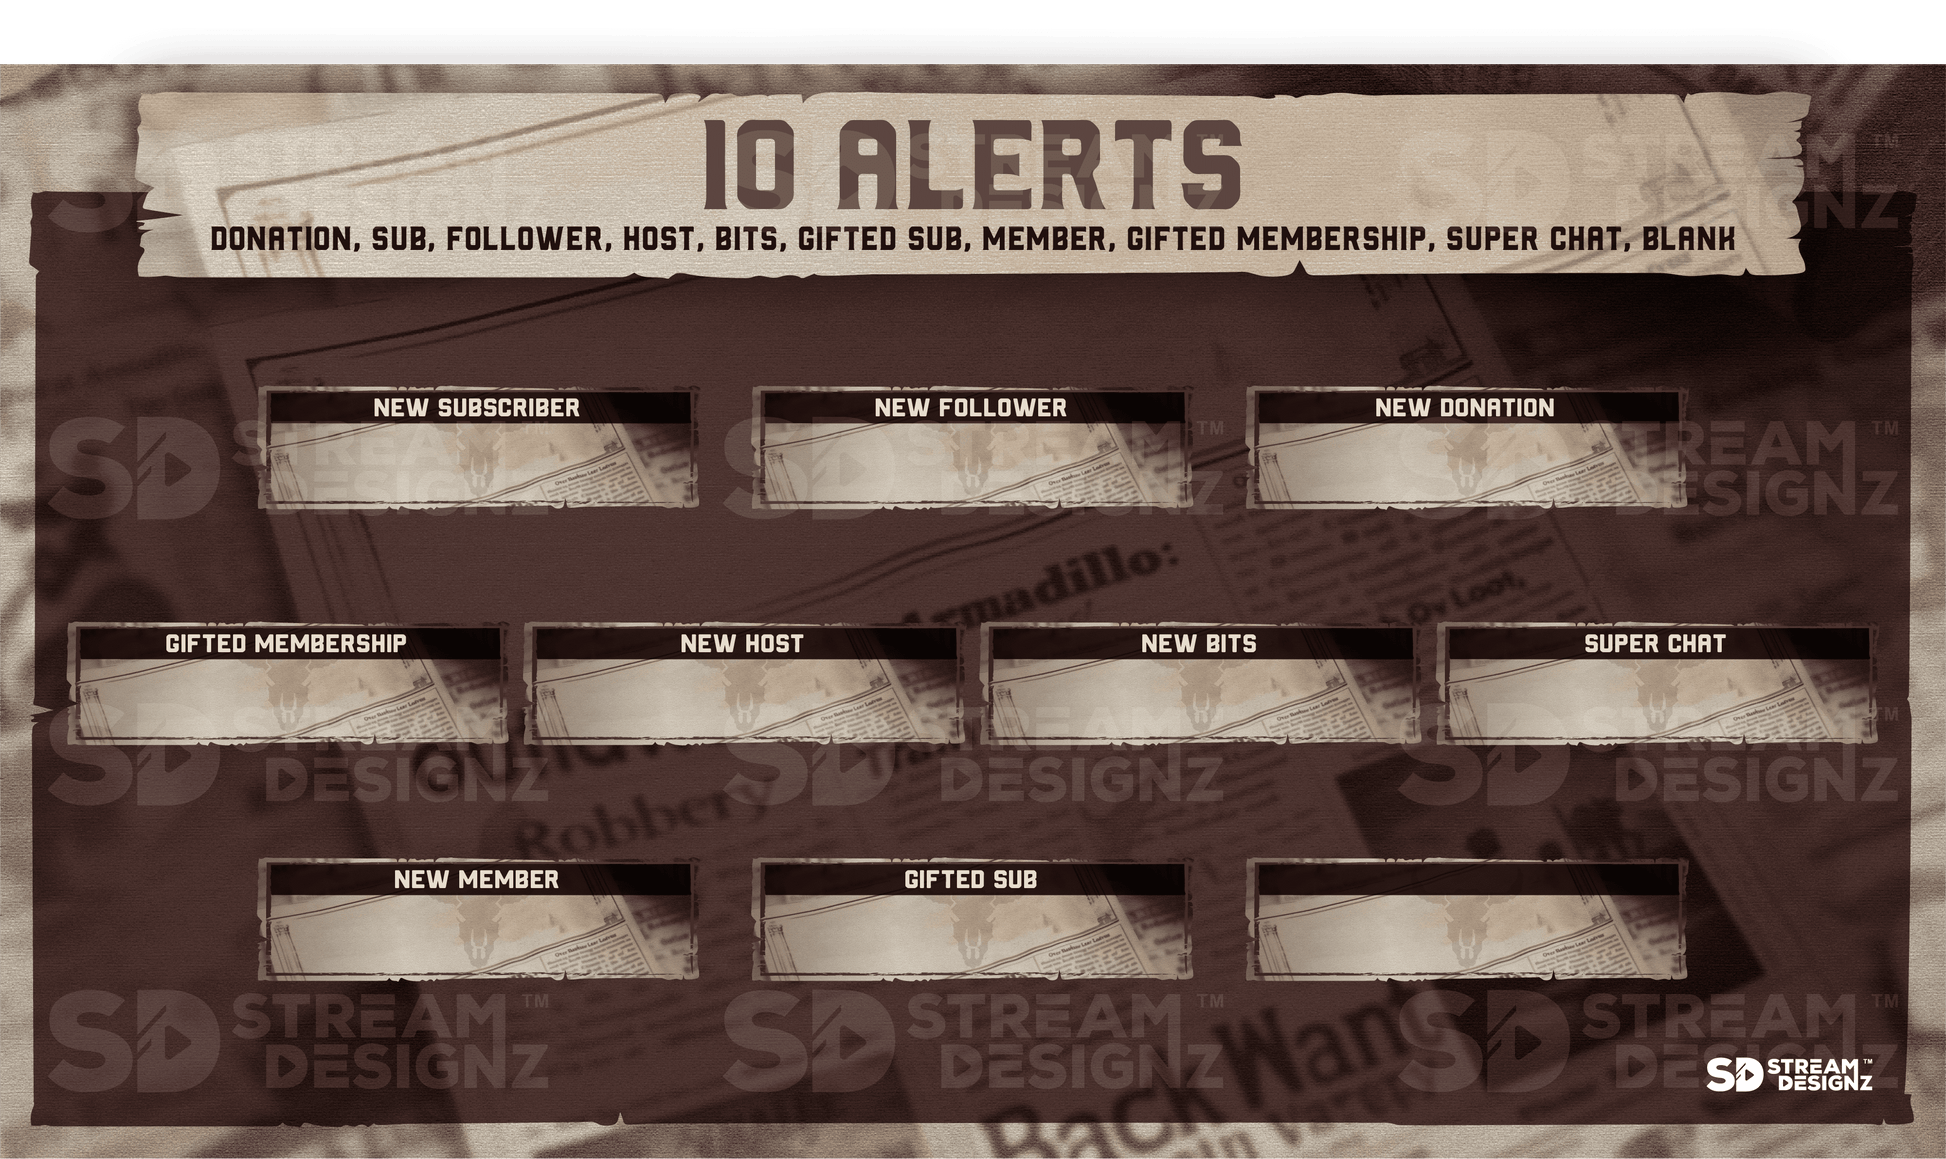 static stream overlay package 10 alerts outlaw stream designz